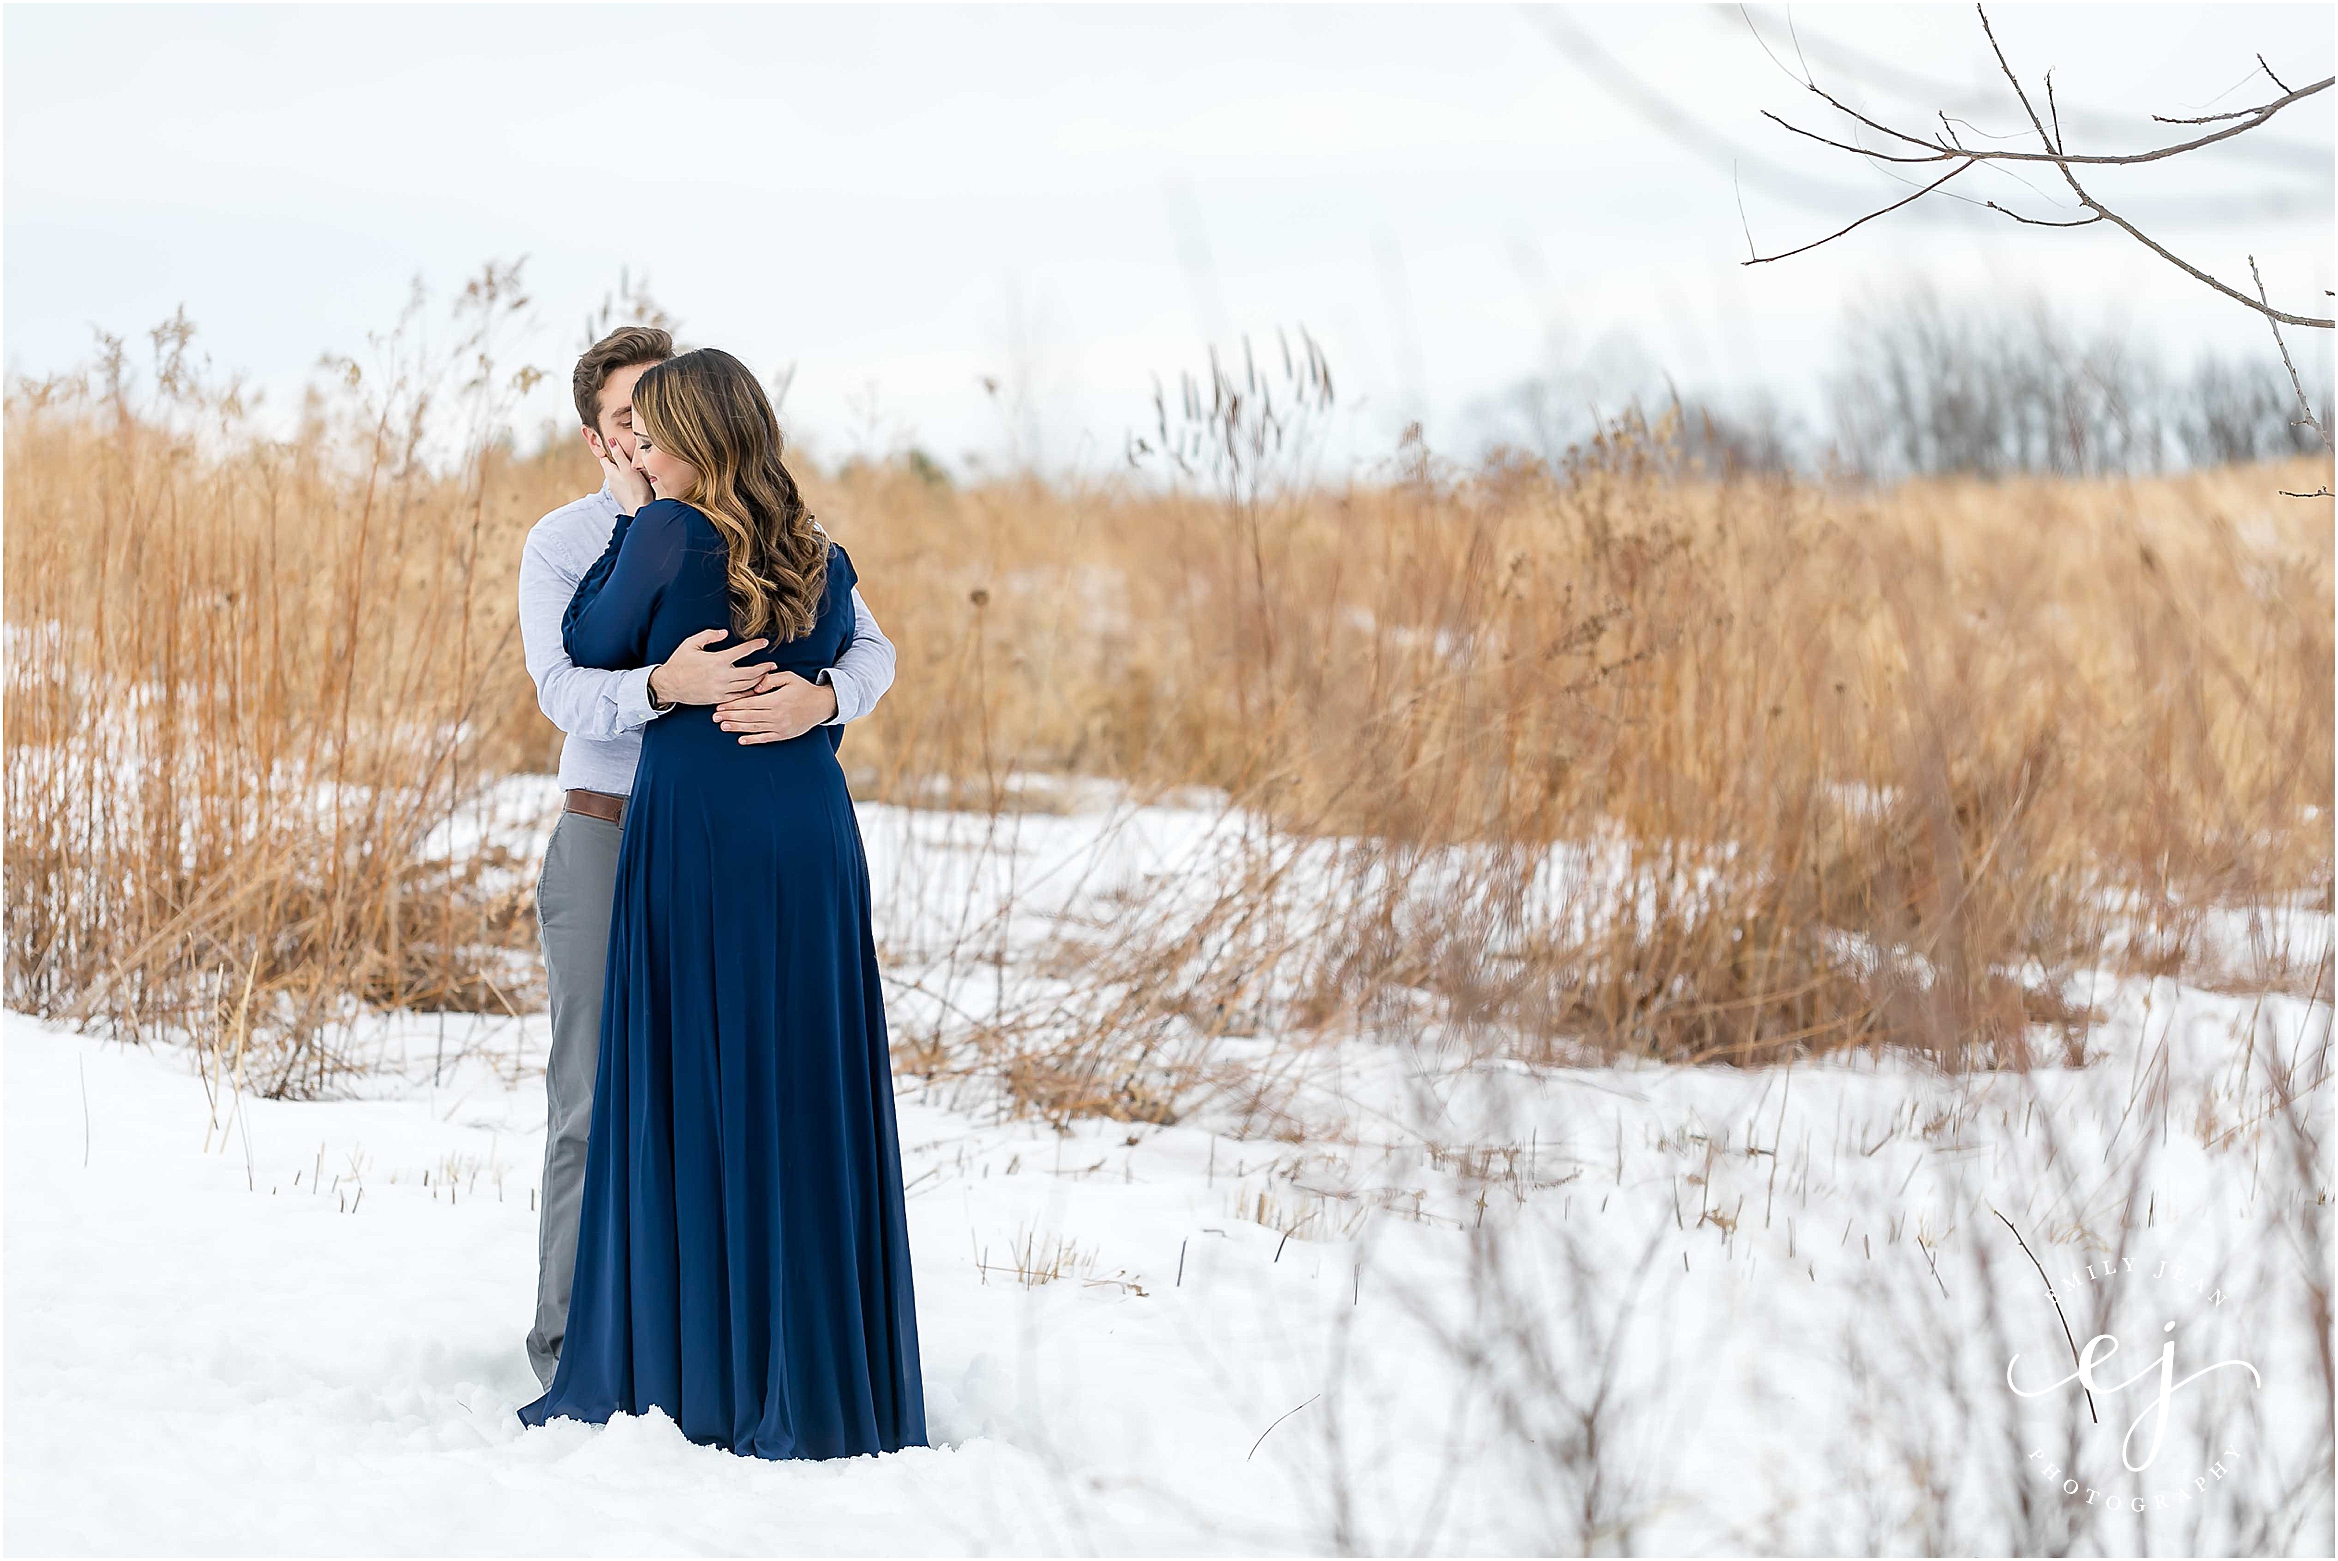 engagement session winter couple standing in snowy field la crosse